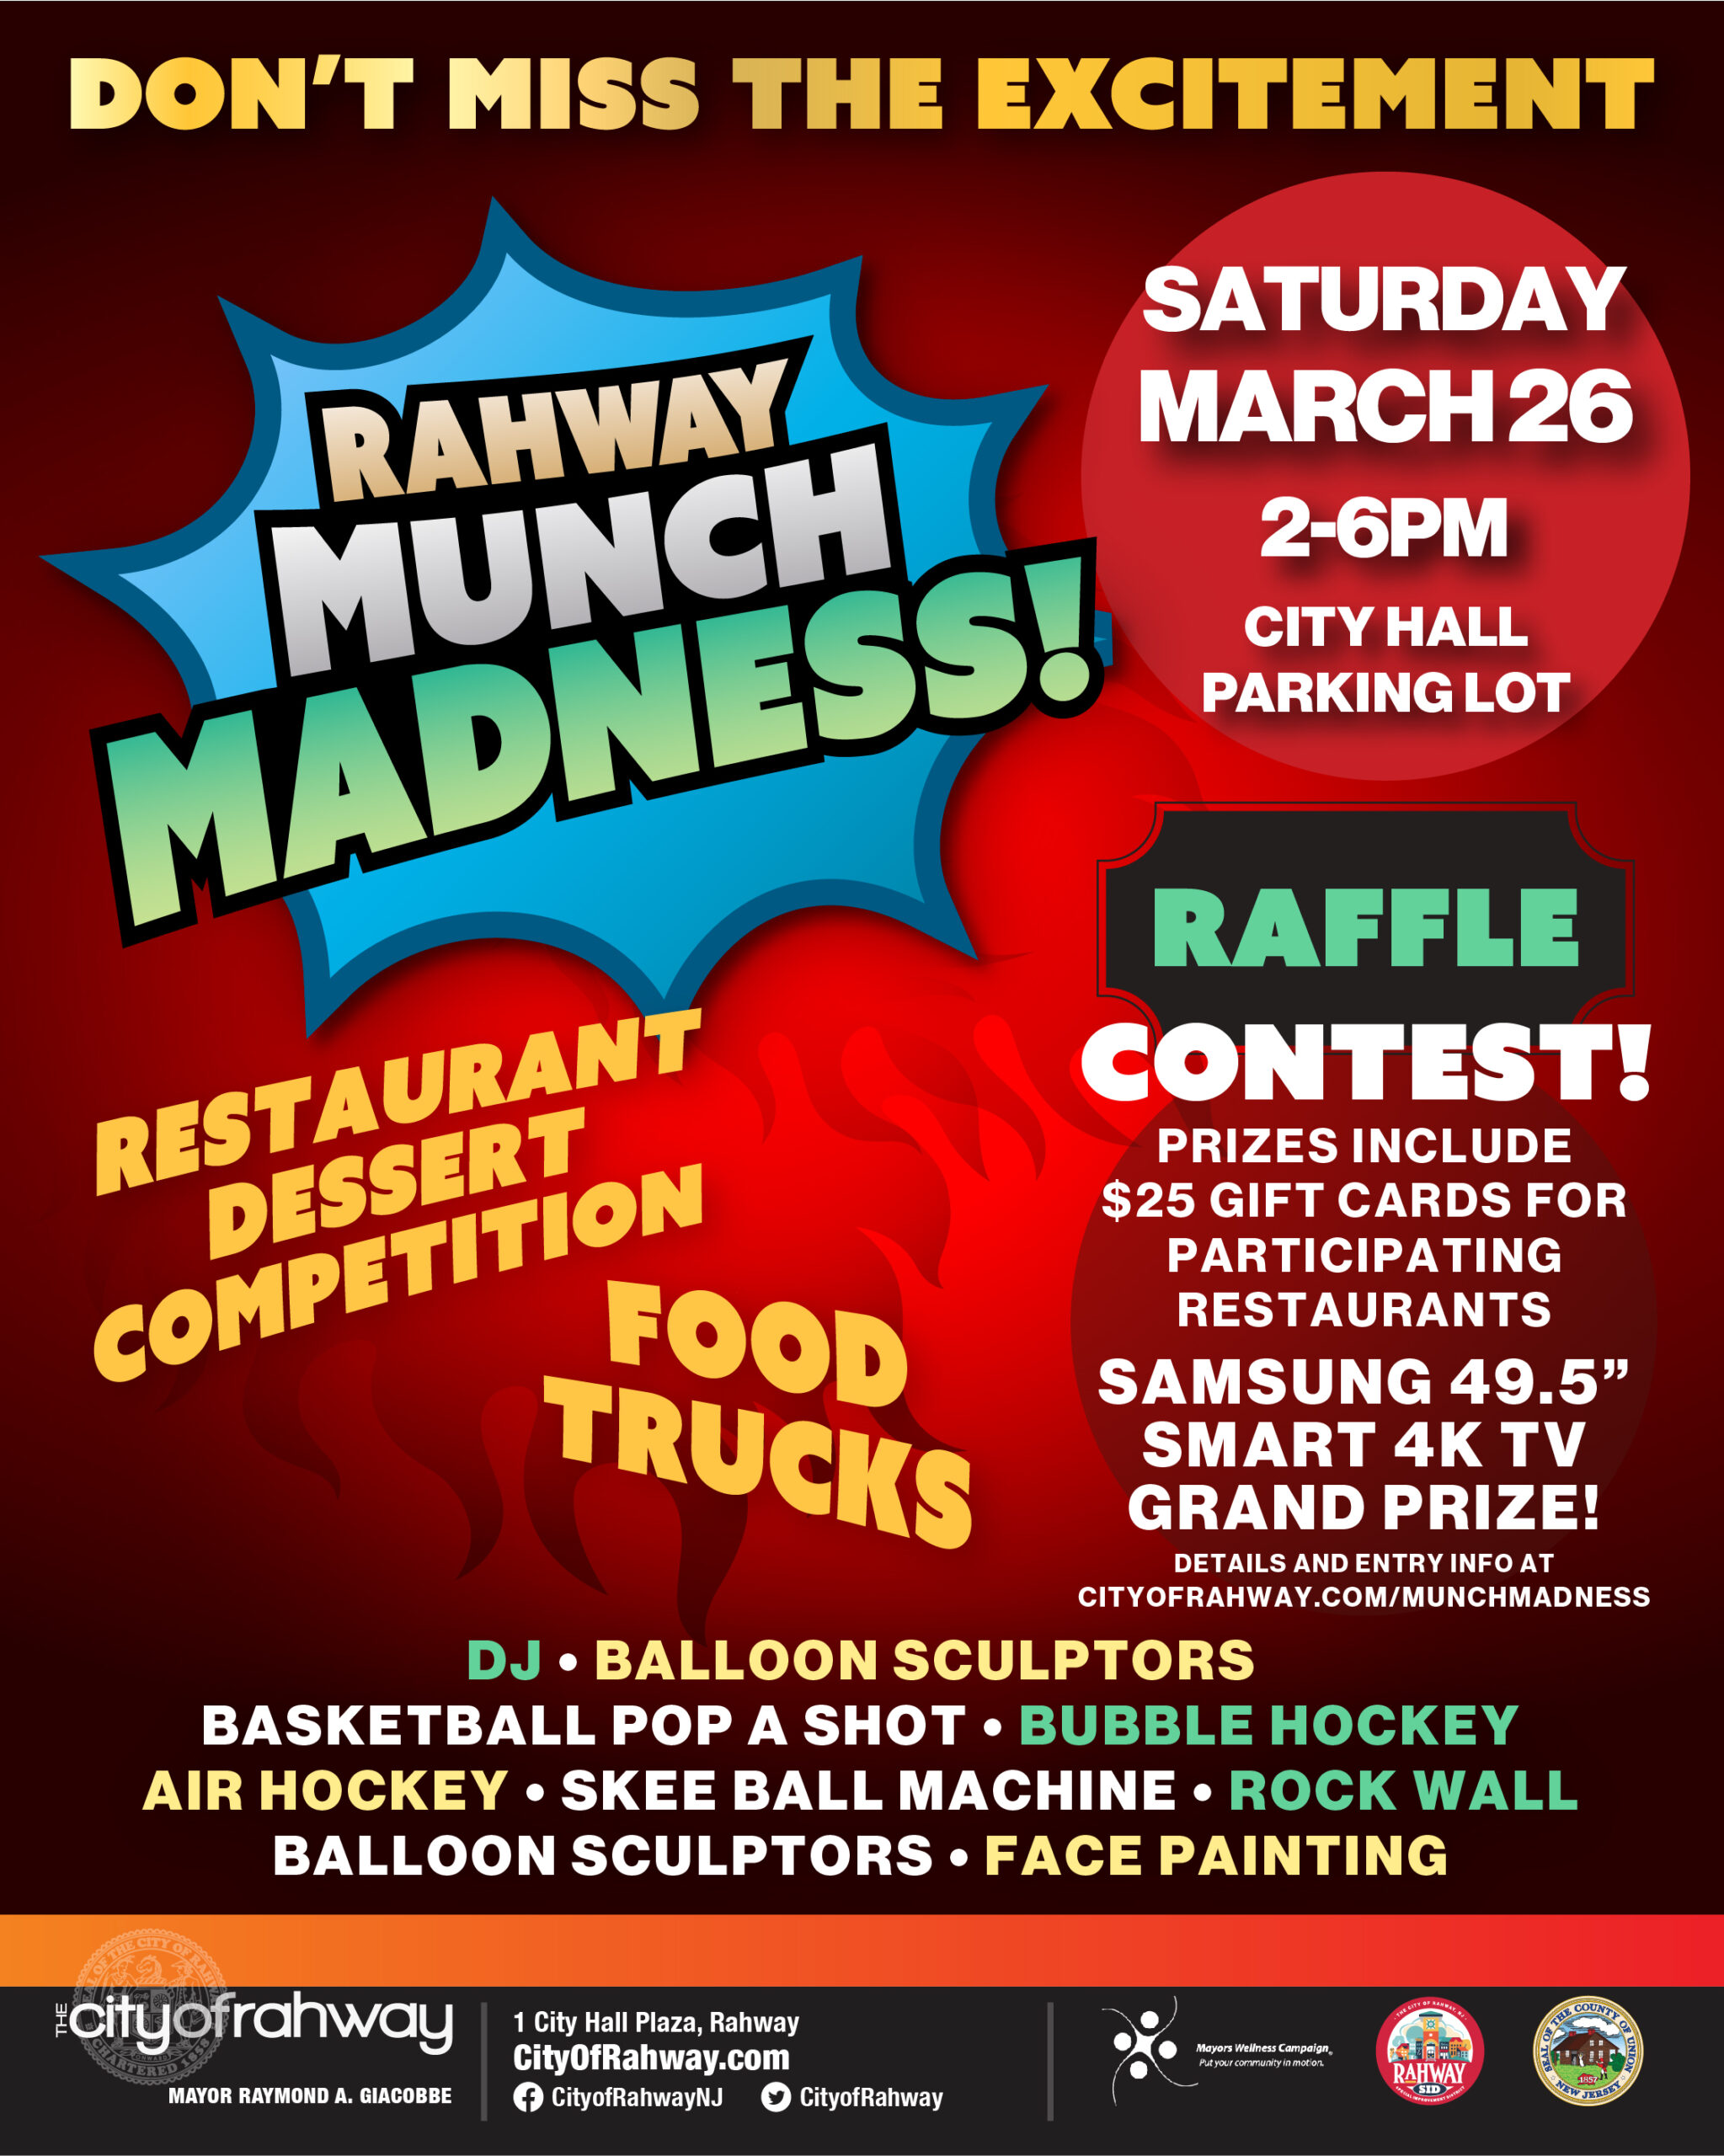 Flyer for Rahway's 2022 Munch Madness showing family events and raffle contest.